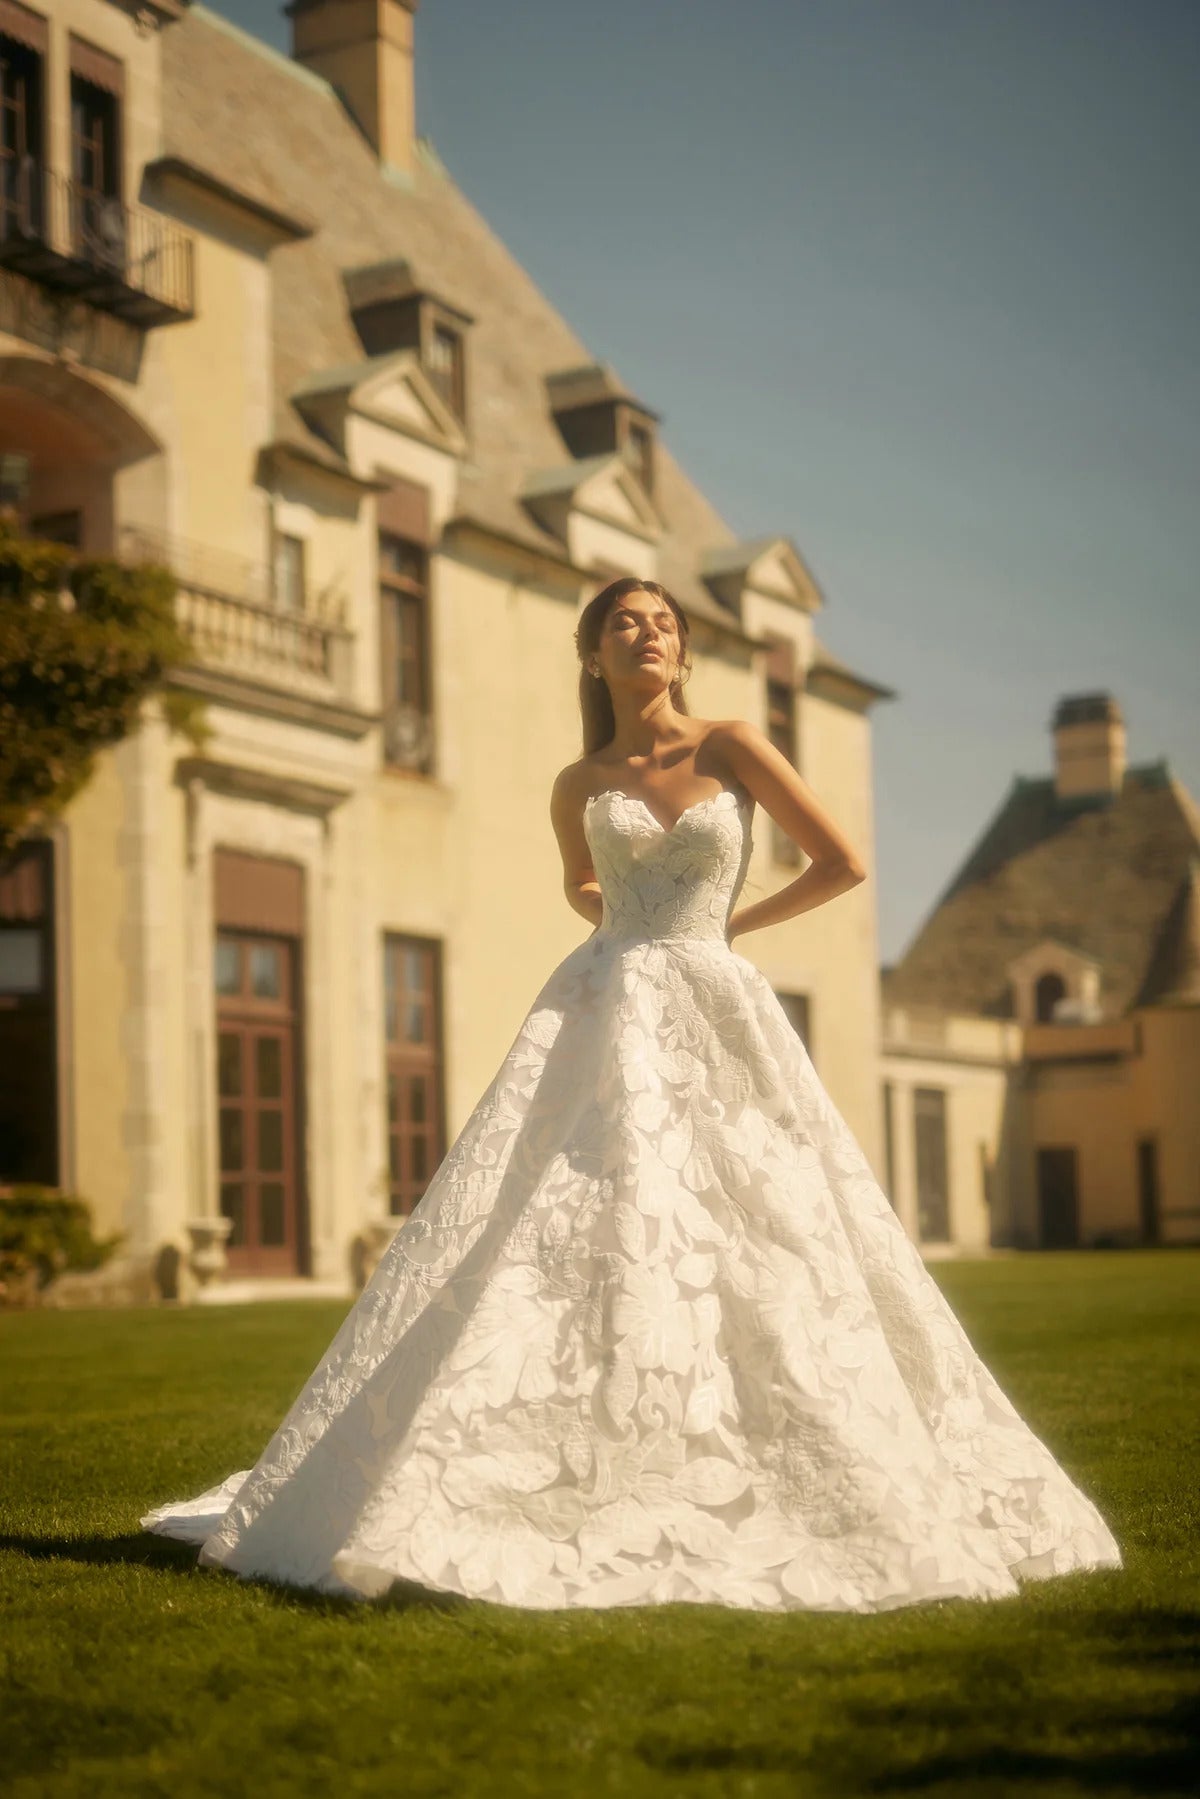 Grand Strapless Ball Gown With Organic Details by Enaura Bridal - Image 1